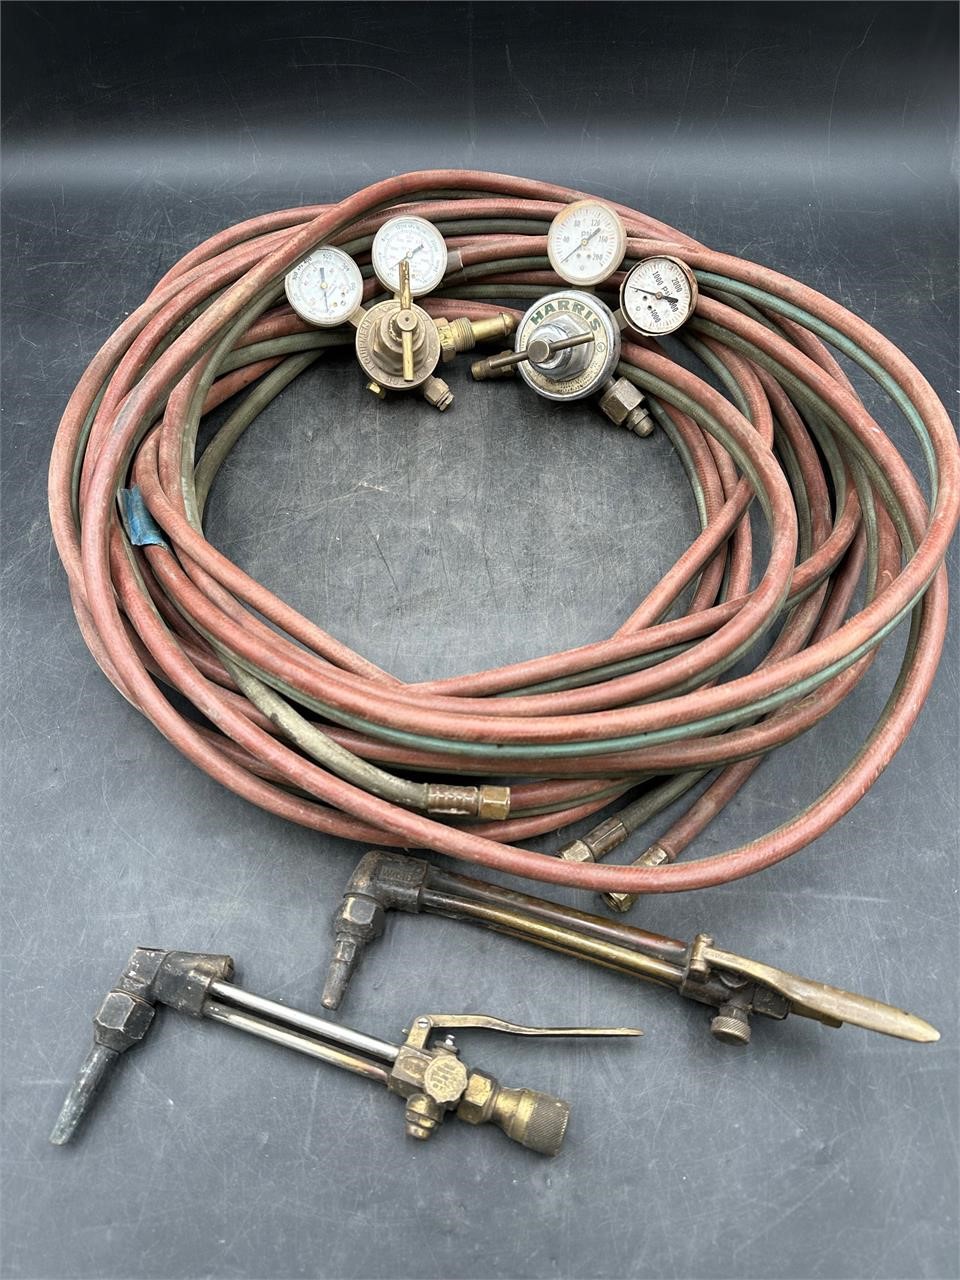 Approx 50' Hose & Torch Items